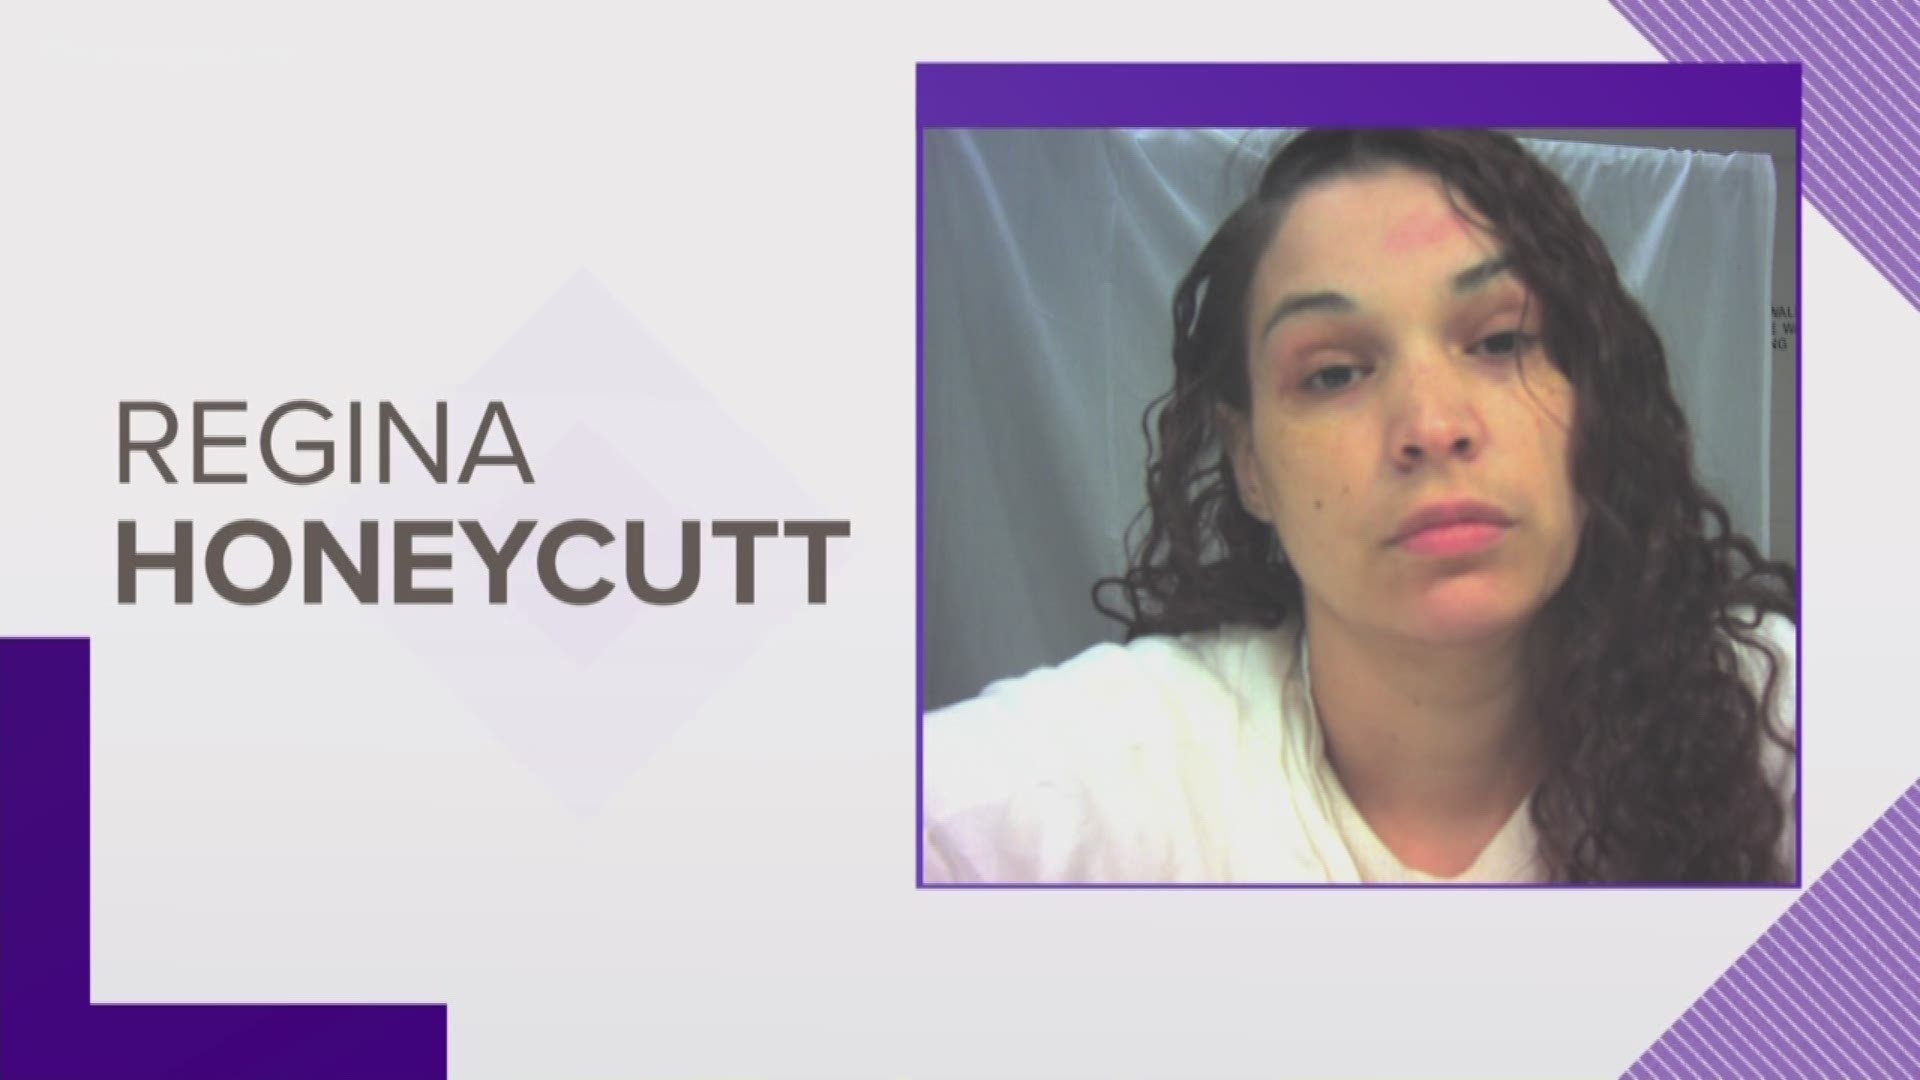 Regina Honeycutt, an inmate at the Hampton Roads Regional Jail, died at the hospital on October 7, 2018. Staff members said Honeycutt had a medical emergency while she was in custody.